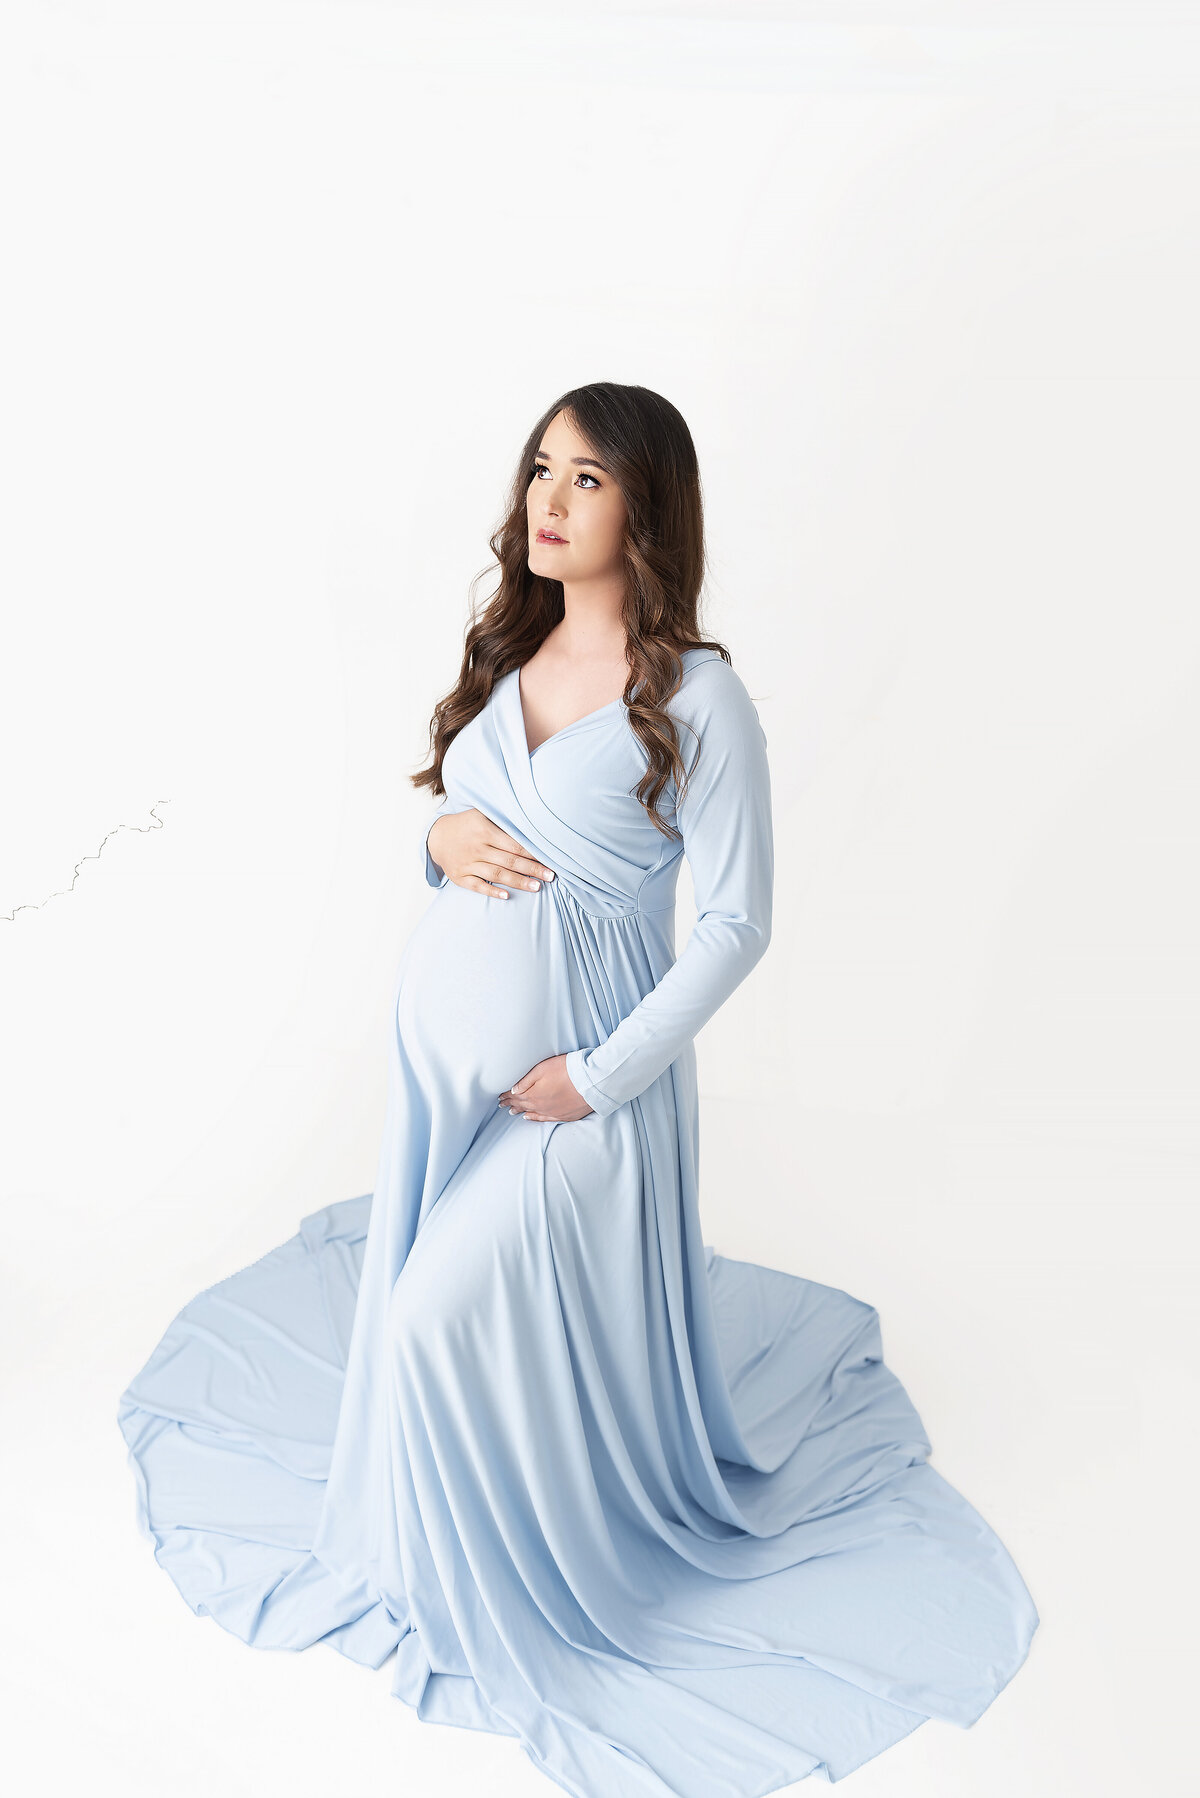 A woman stands in a studio in a long flowing maternity gown with hands on her bump